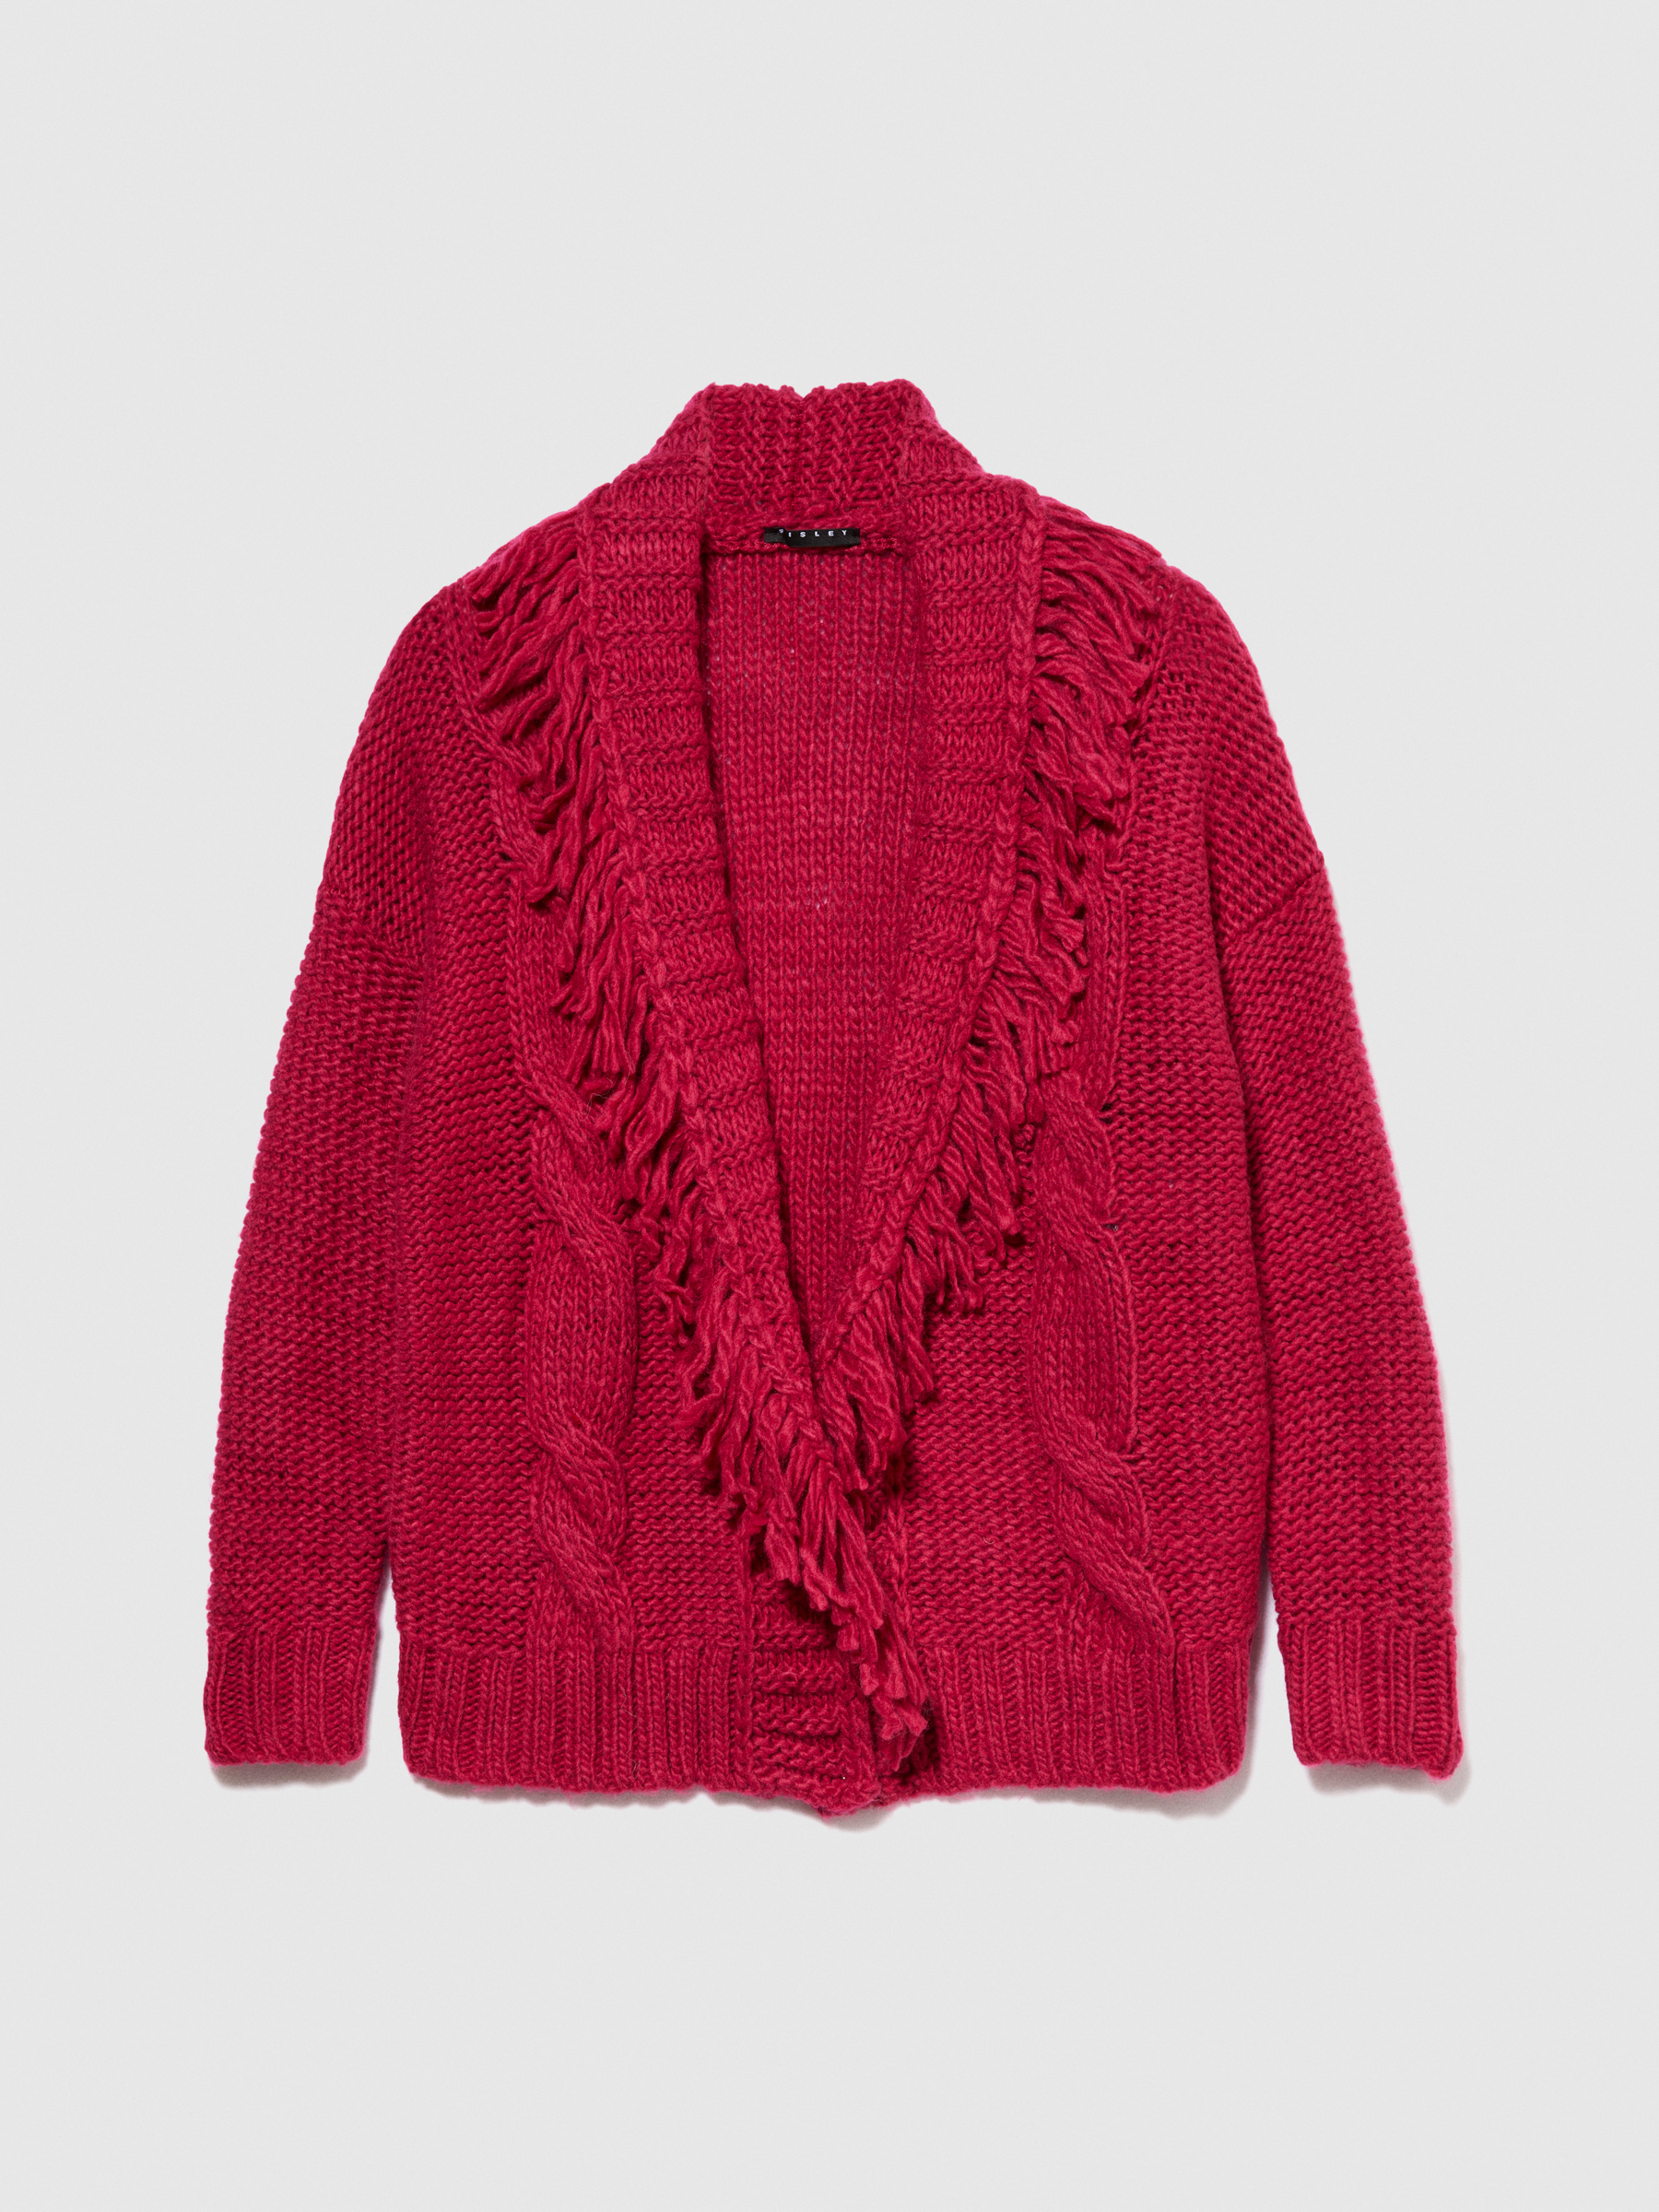 Sisley Young - Cardigan With Fringes, Woman, Fuchsia, Size: M